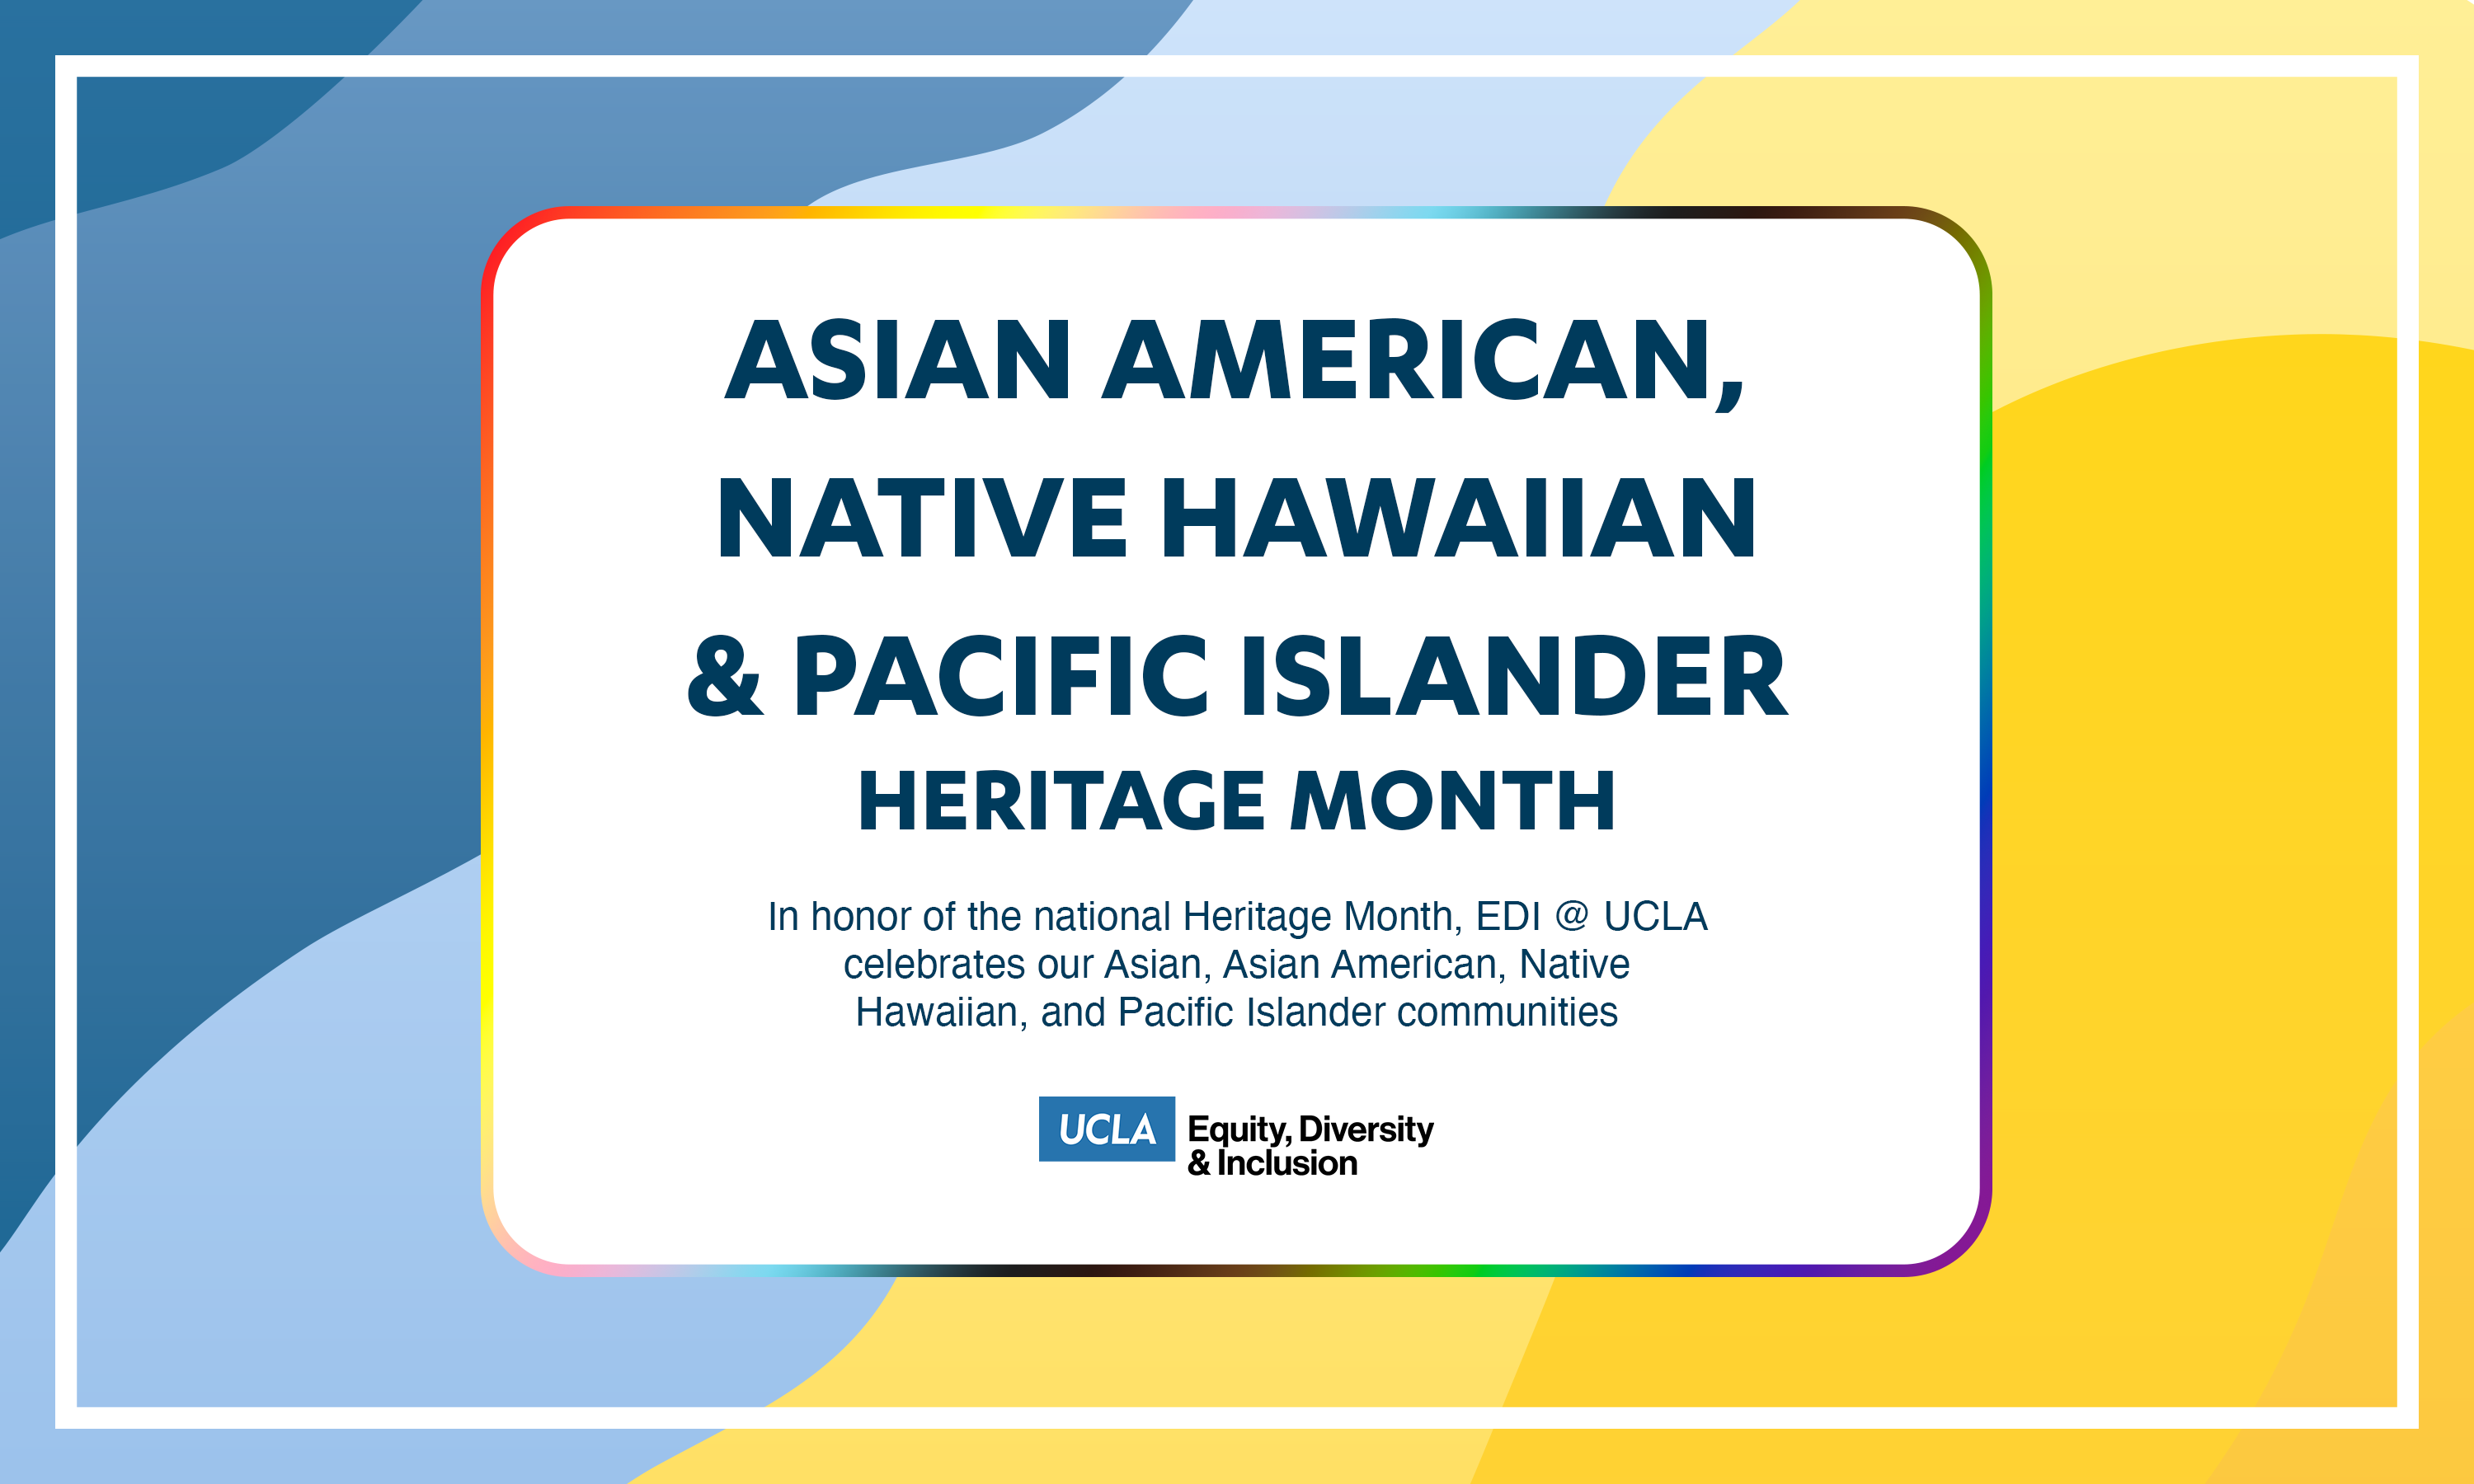 asian american, native hawaiian & pacific islander hereitage month - in honor of the national heritage month, edi @ ucla celebrates our asian, asian american, native hawaiian, and pacific islander communities